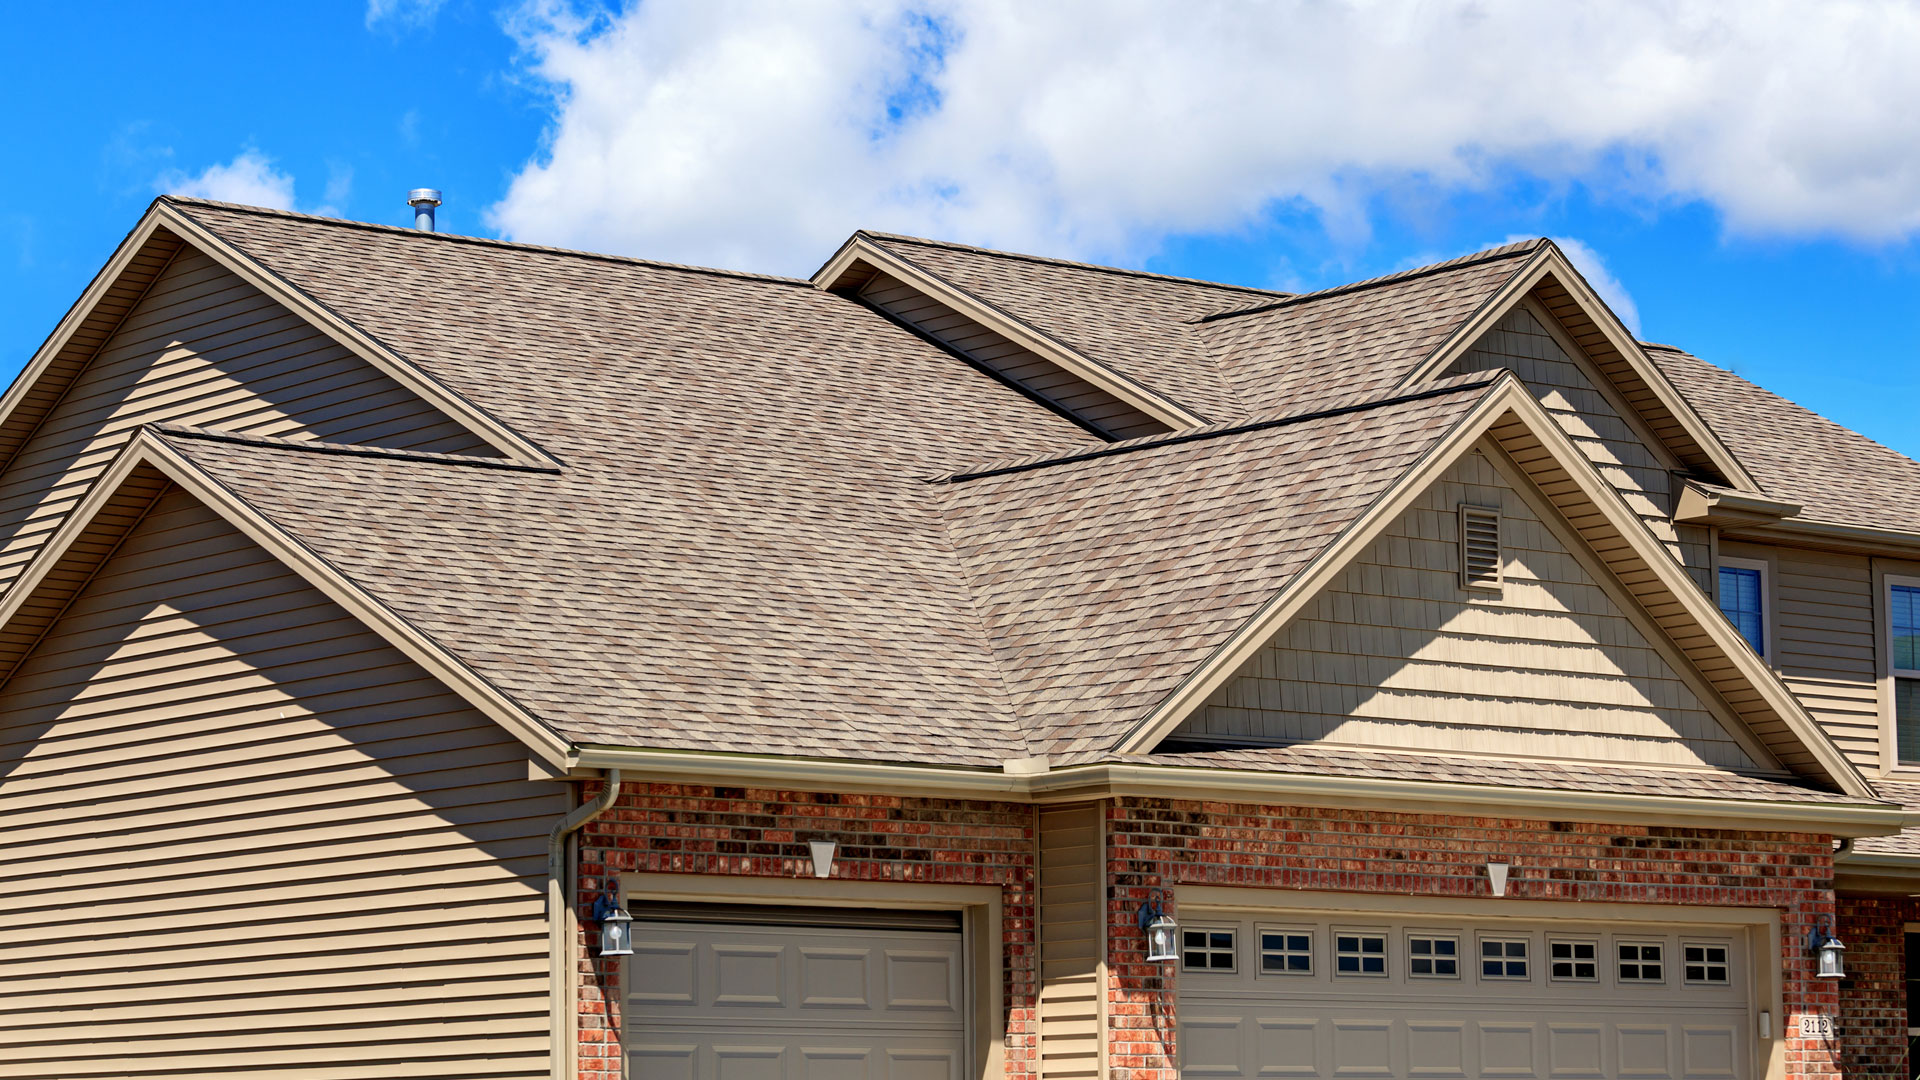 Do you service roof repairs, fascia, soffit, gutters, or siding?